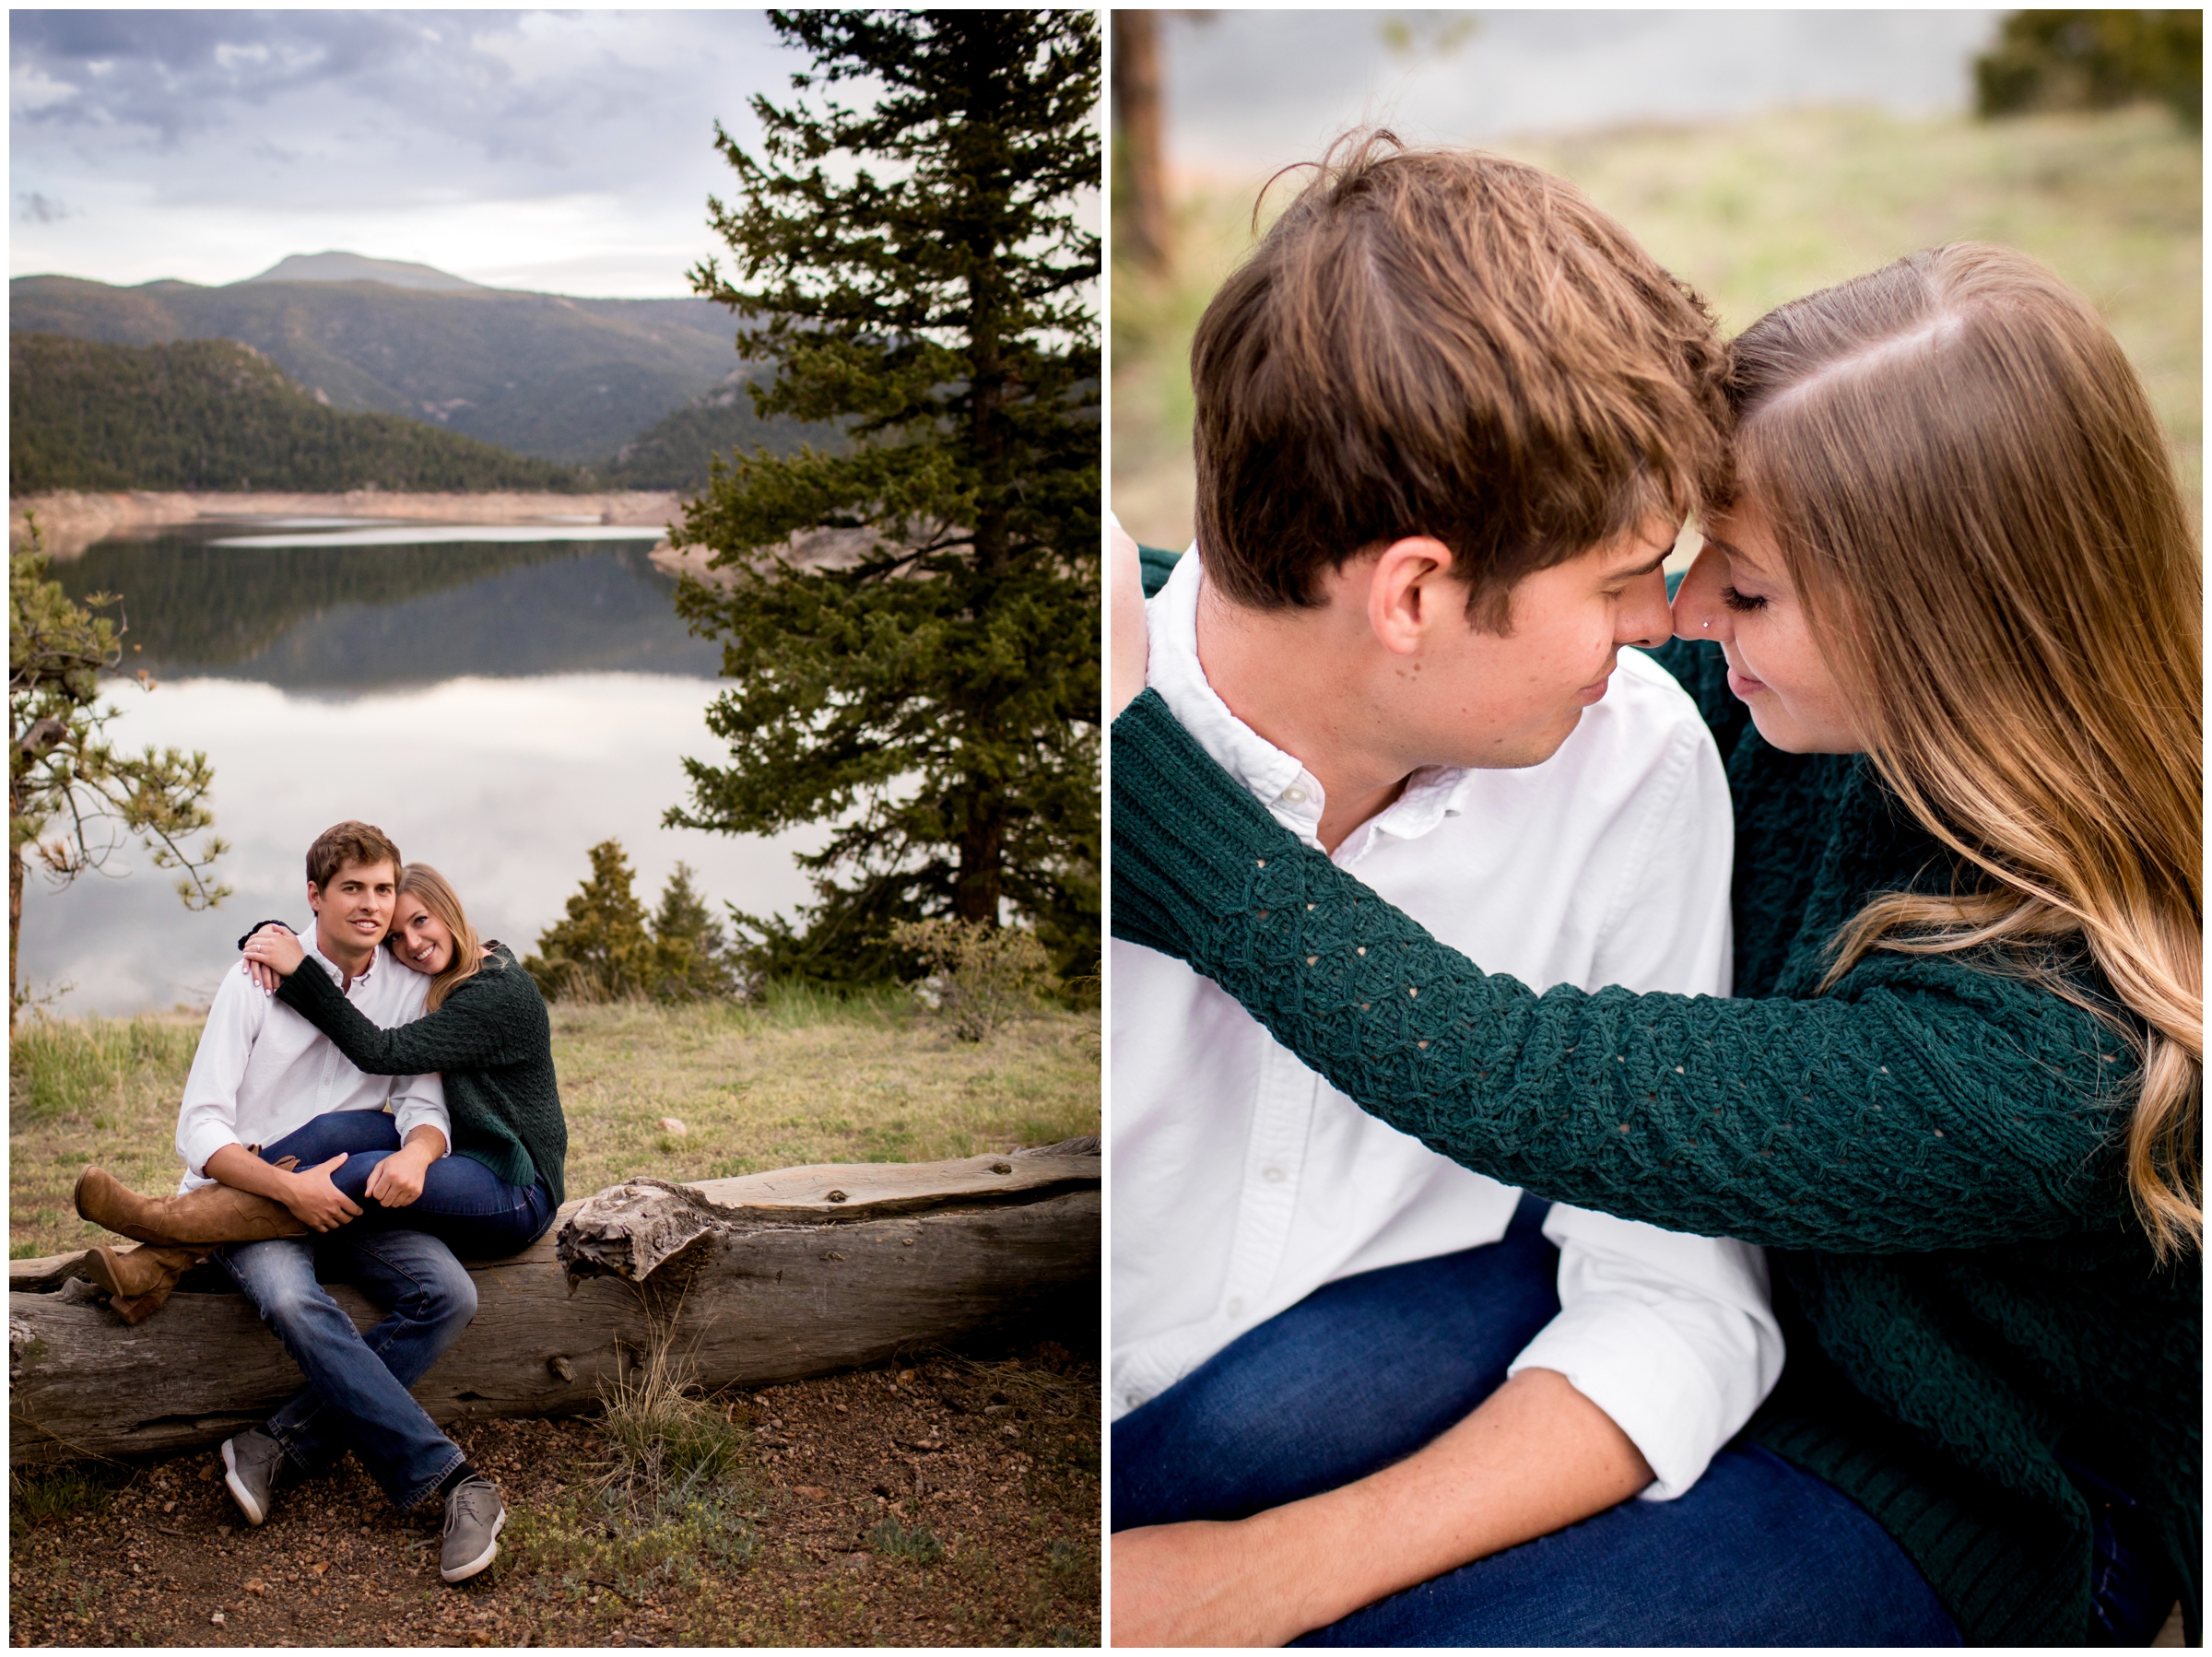 Lake engagement pictures in the Colorado mountains by Plum pretty photography 